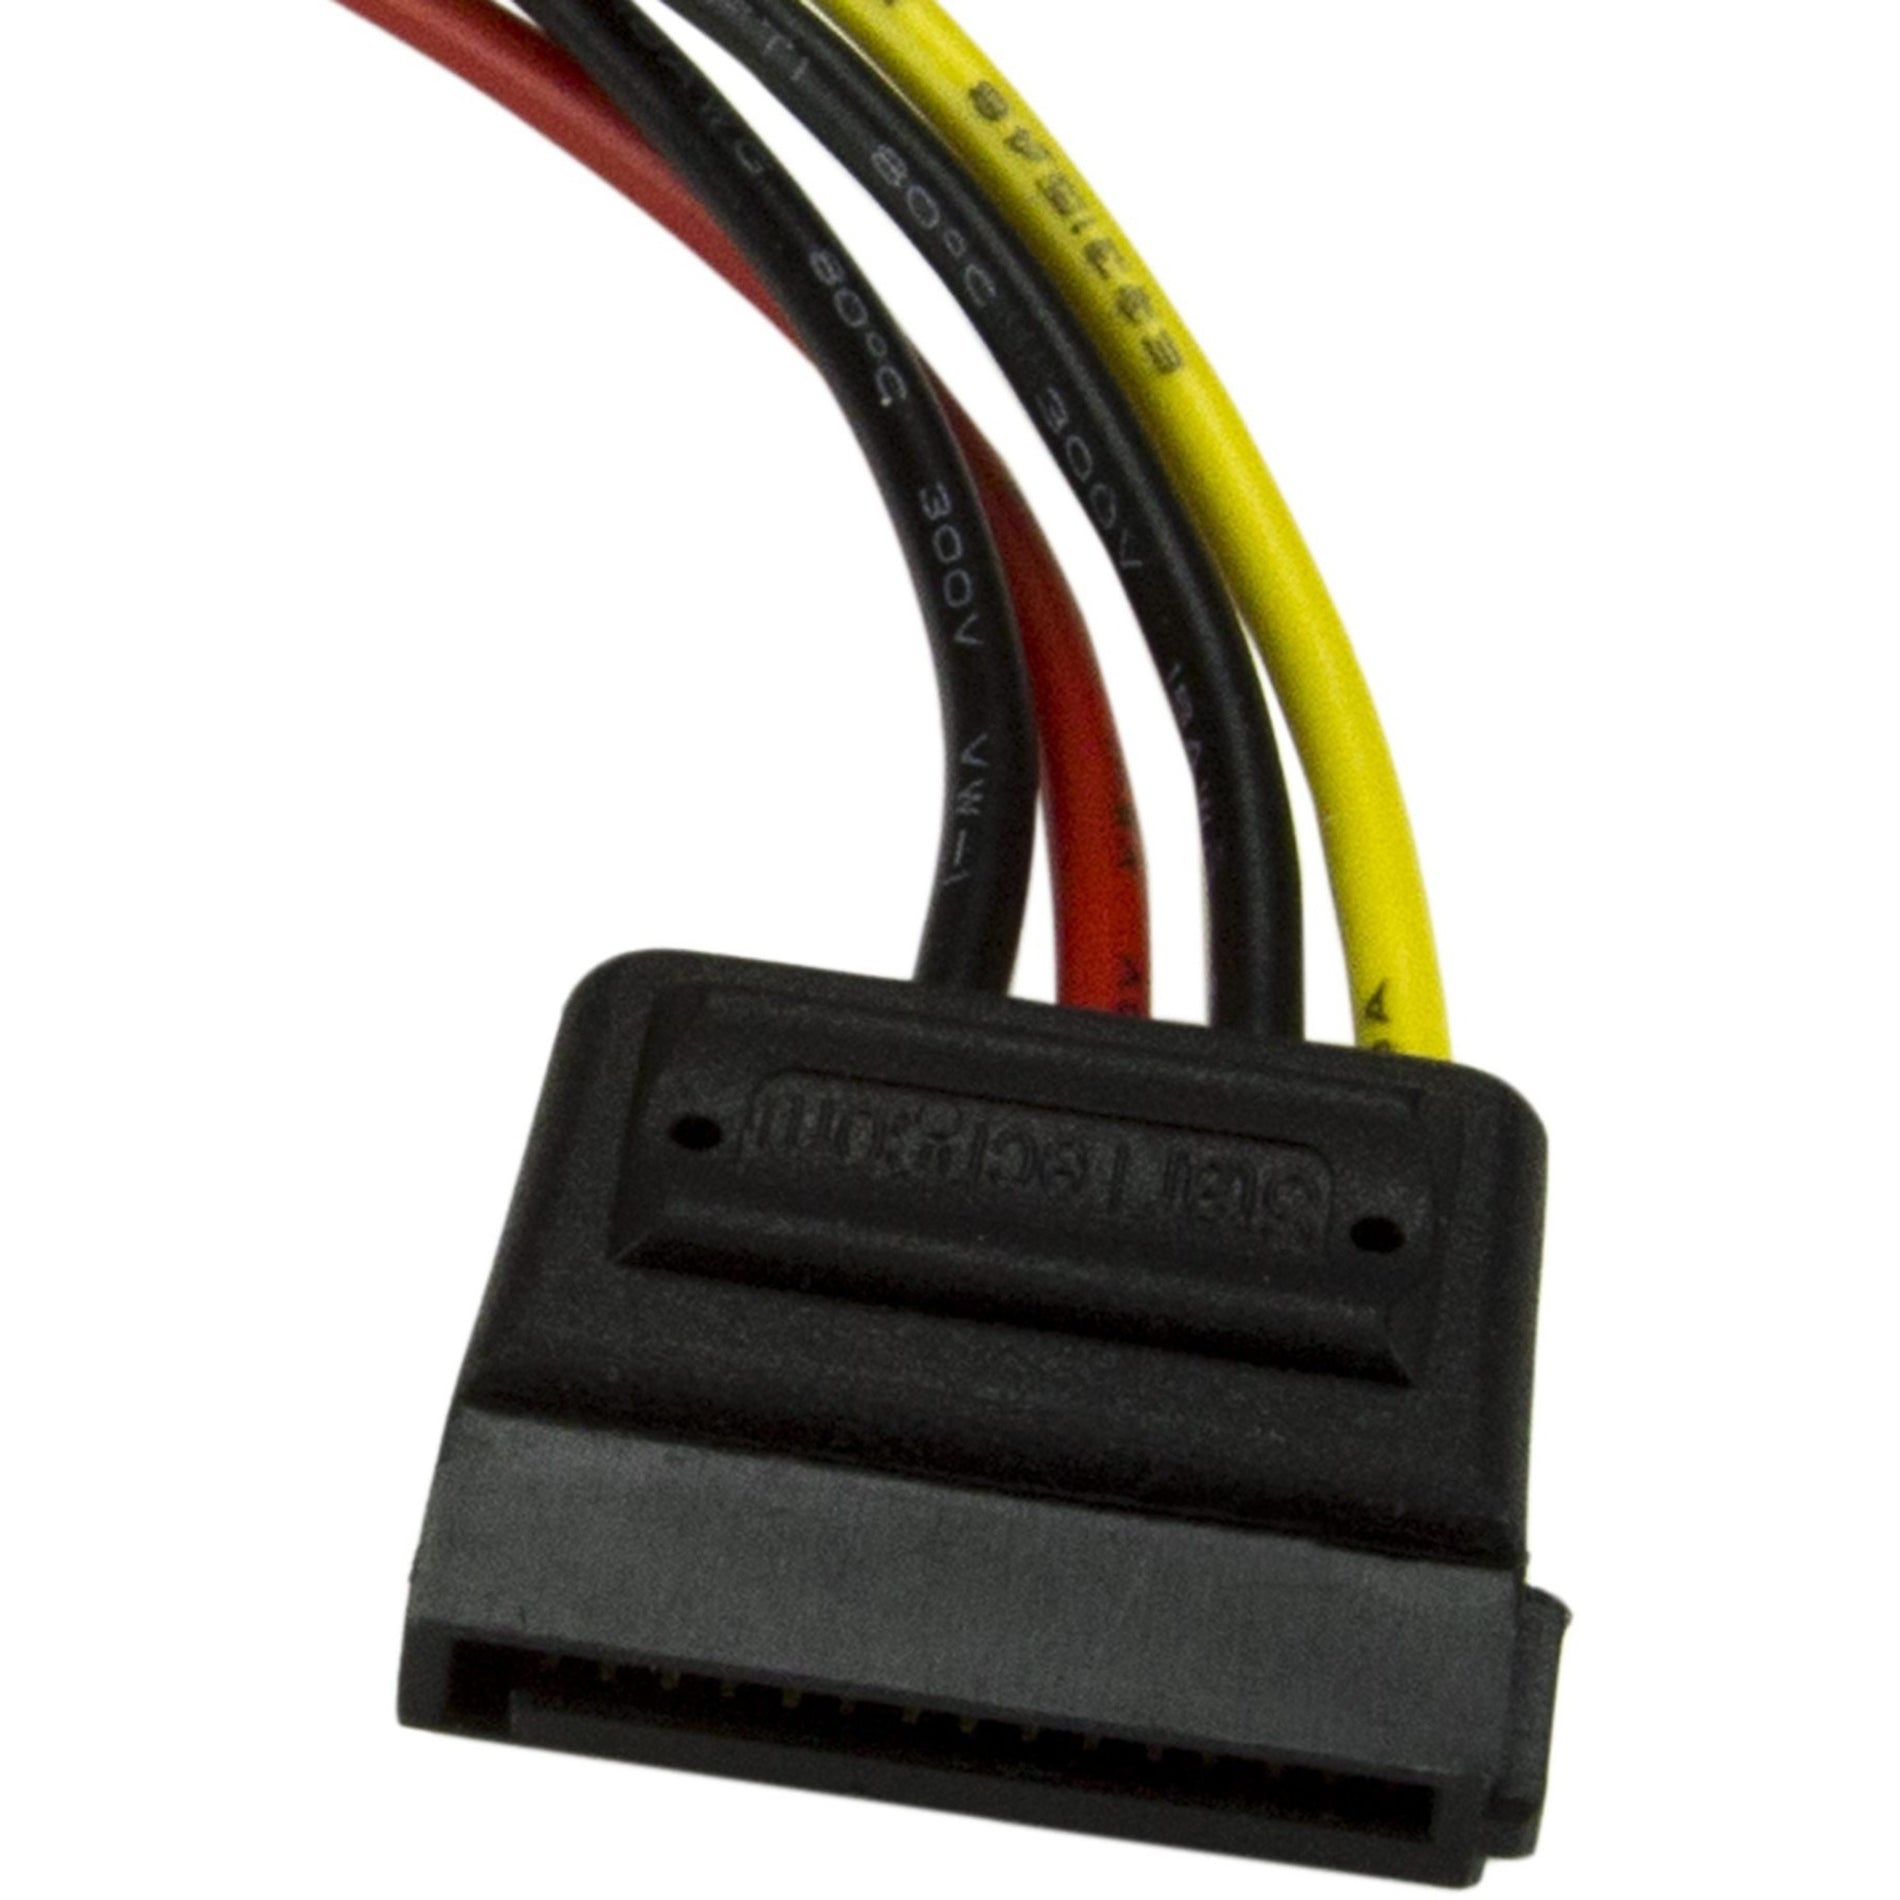 StarTech.com SATAPOWADAP 6in 4 Pin Molex to SATA Power Cable Adapter, Connect Your Hard Drive Effortlessly